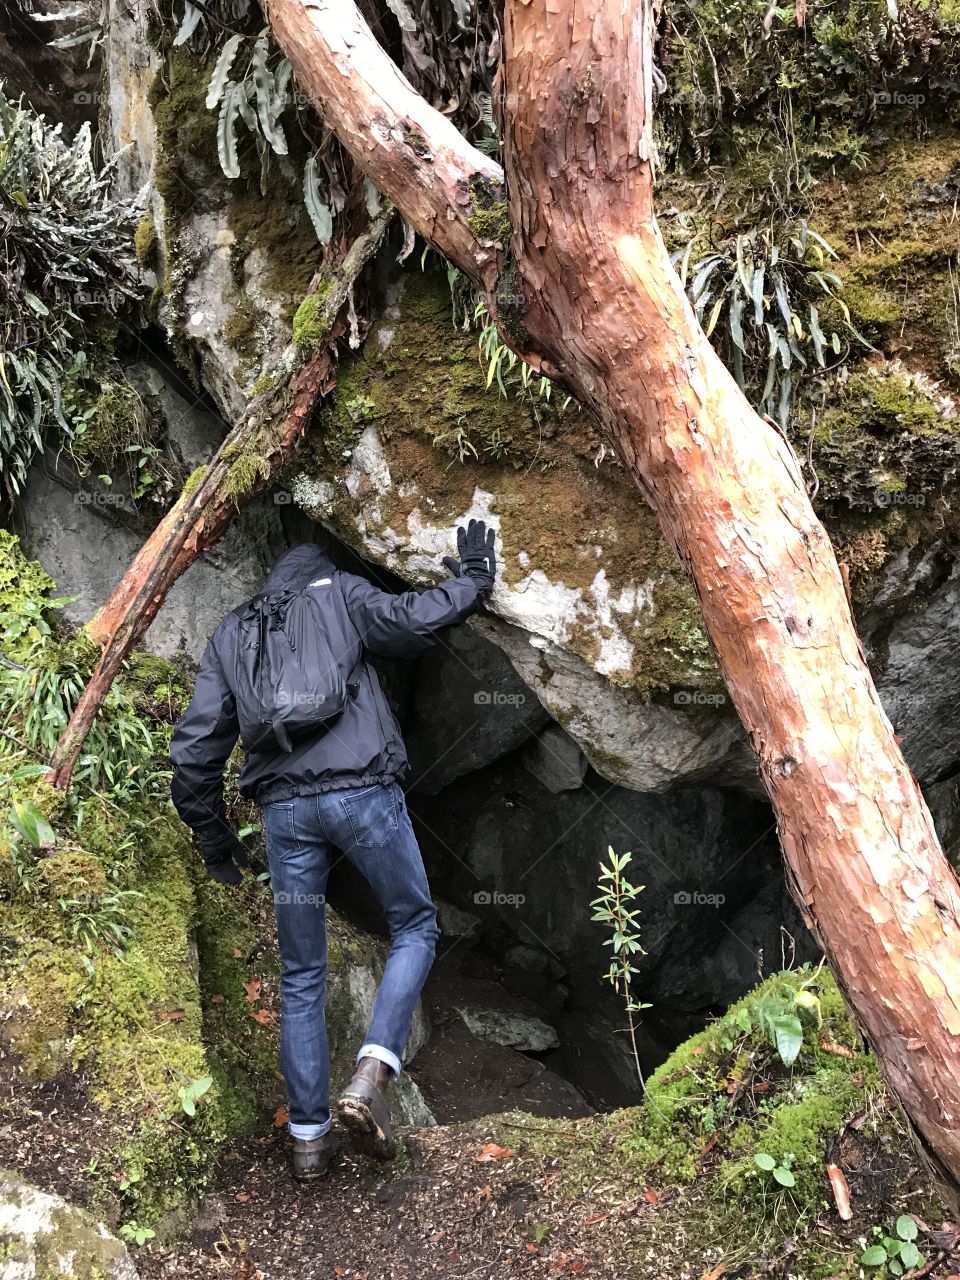 Exploring every nook and cranny in the paper tree covered mountains of Cajas National Park, Ecuador